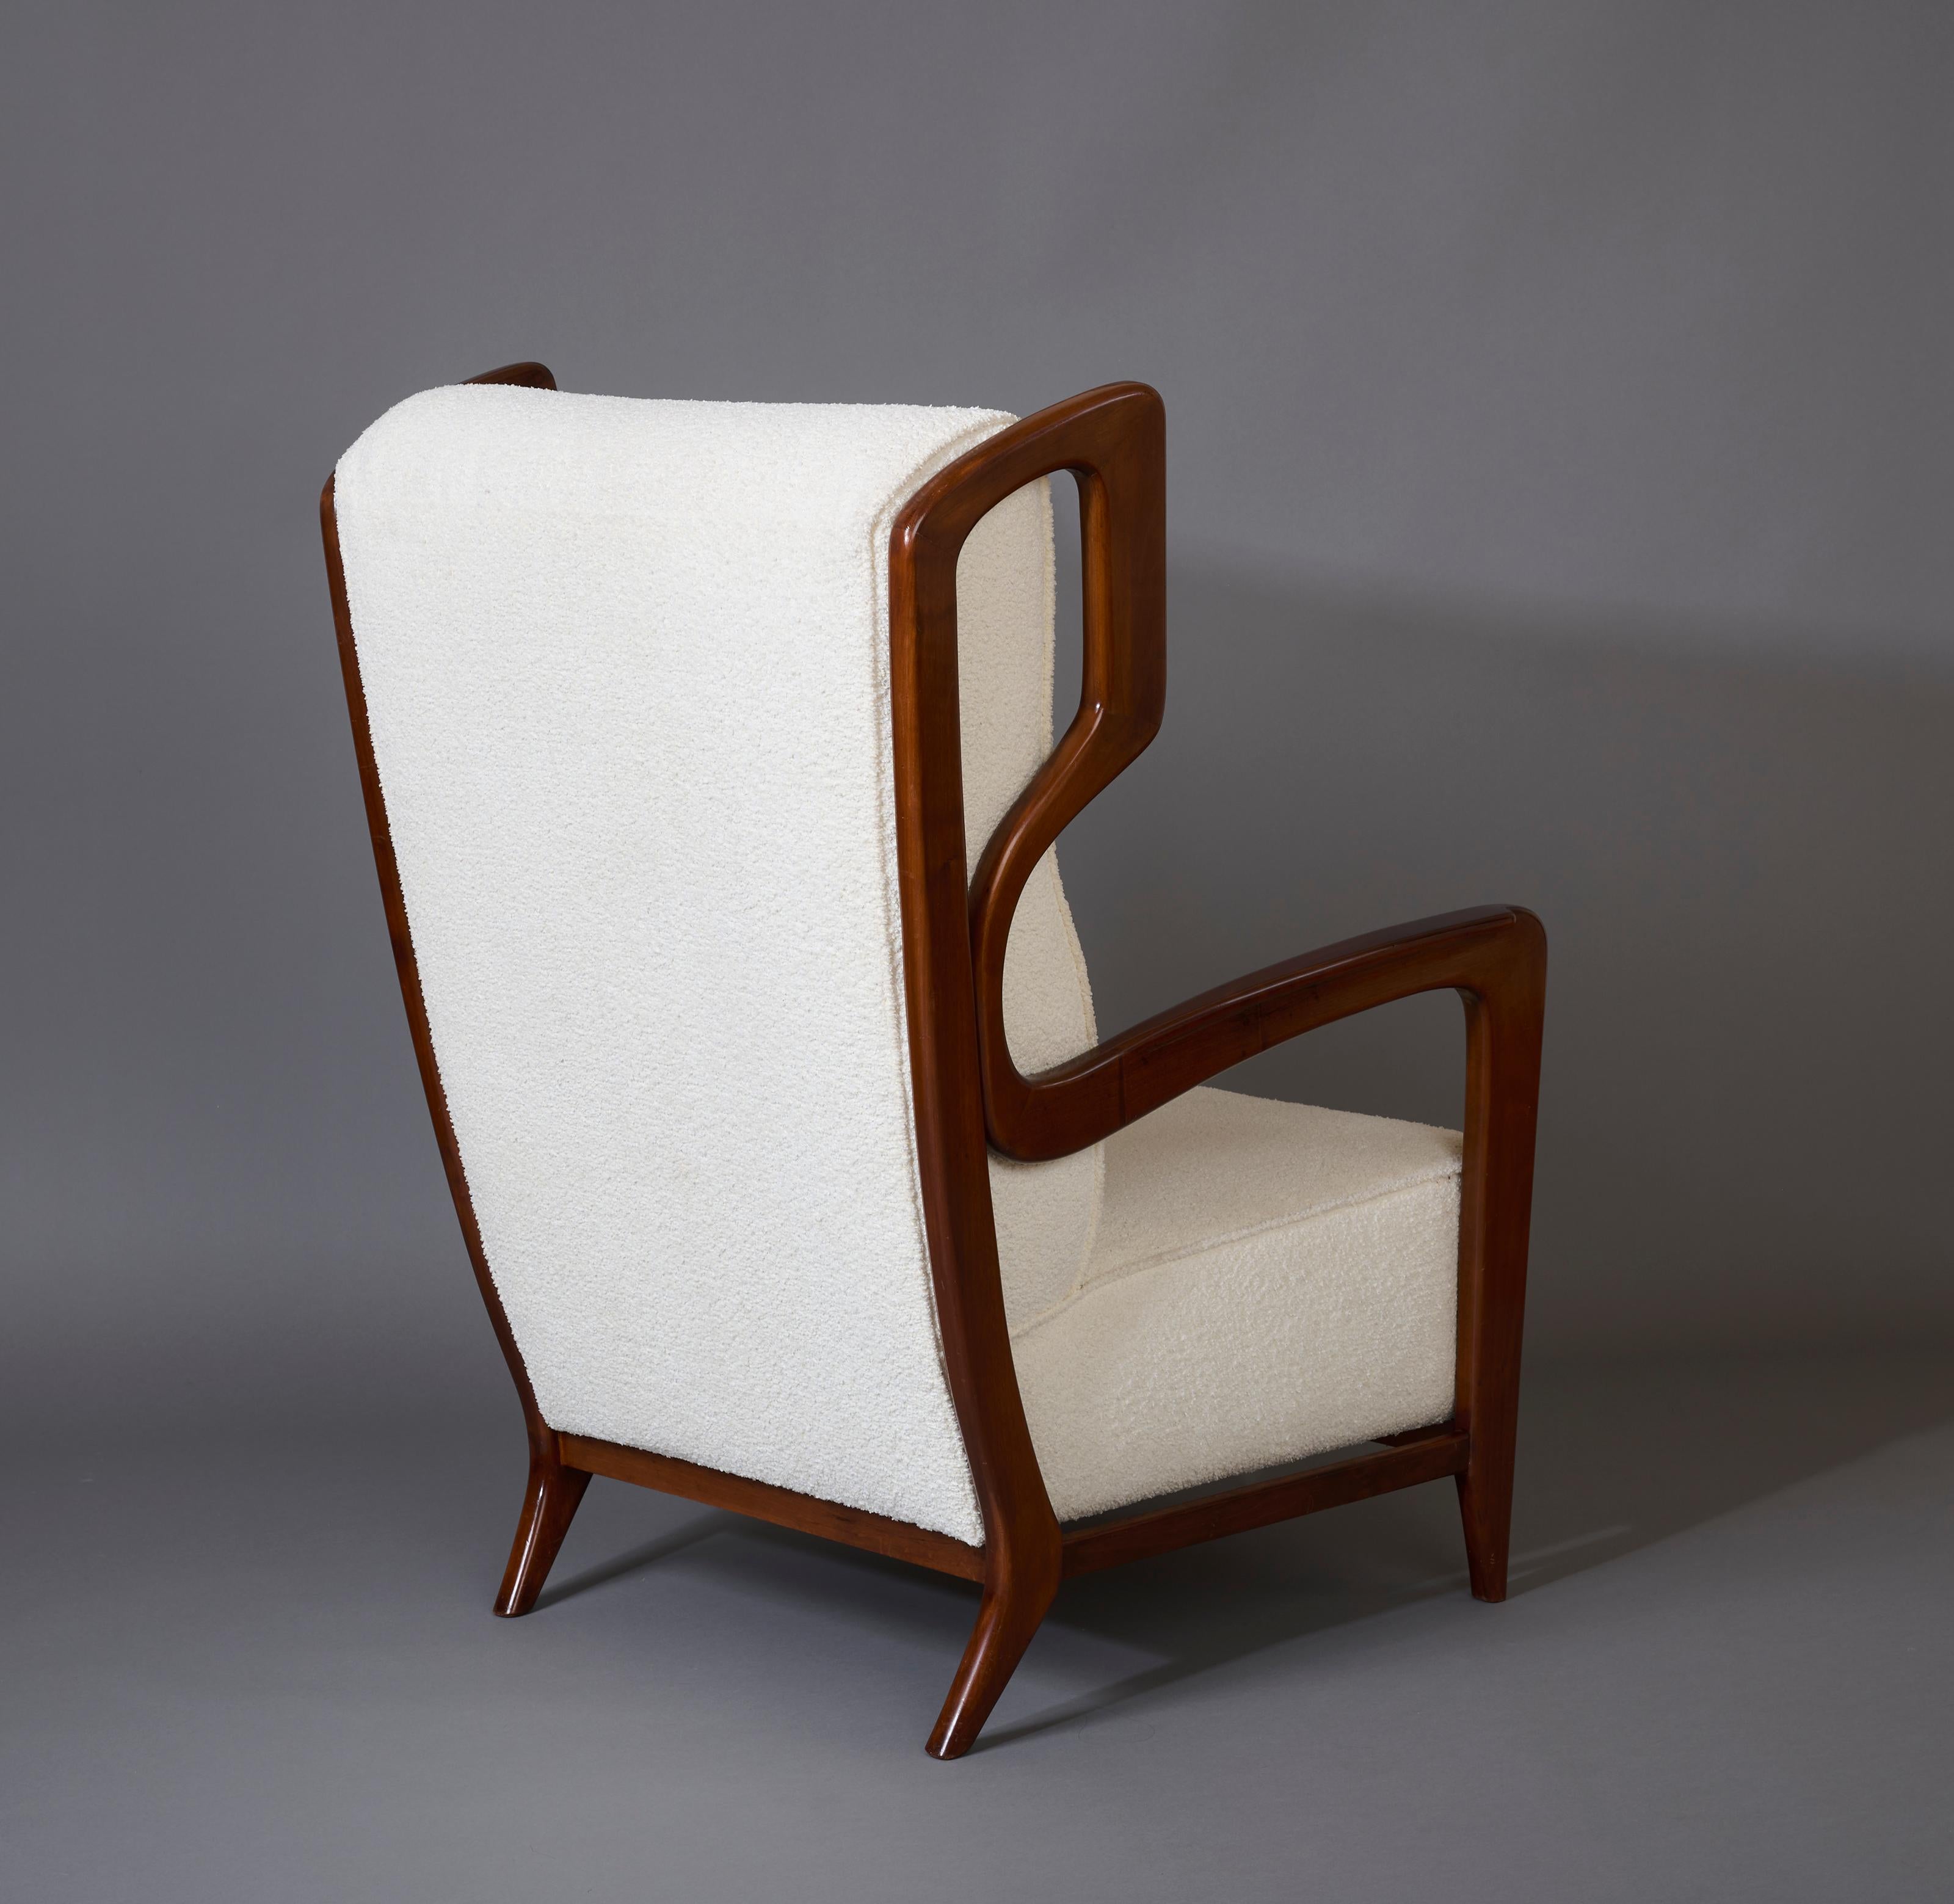 Gio Ponti, Exceptional Pair of Rare Wingback Armchairs in Walnut, Italy, 1940s For Sale 6